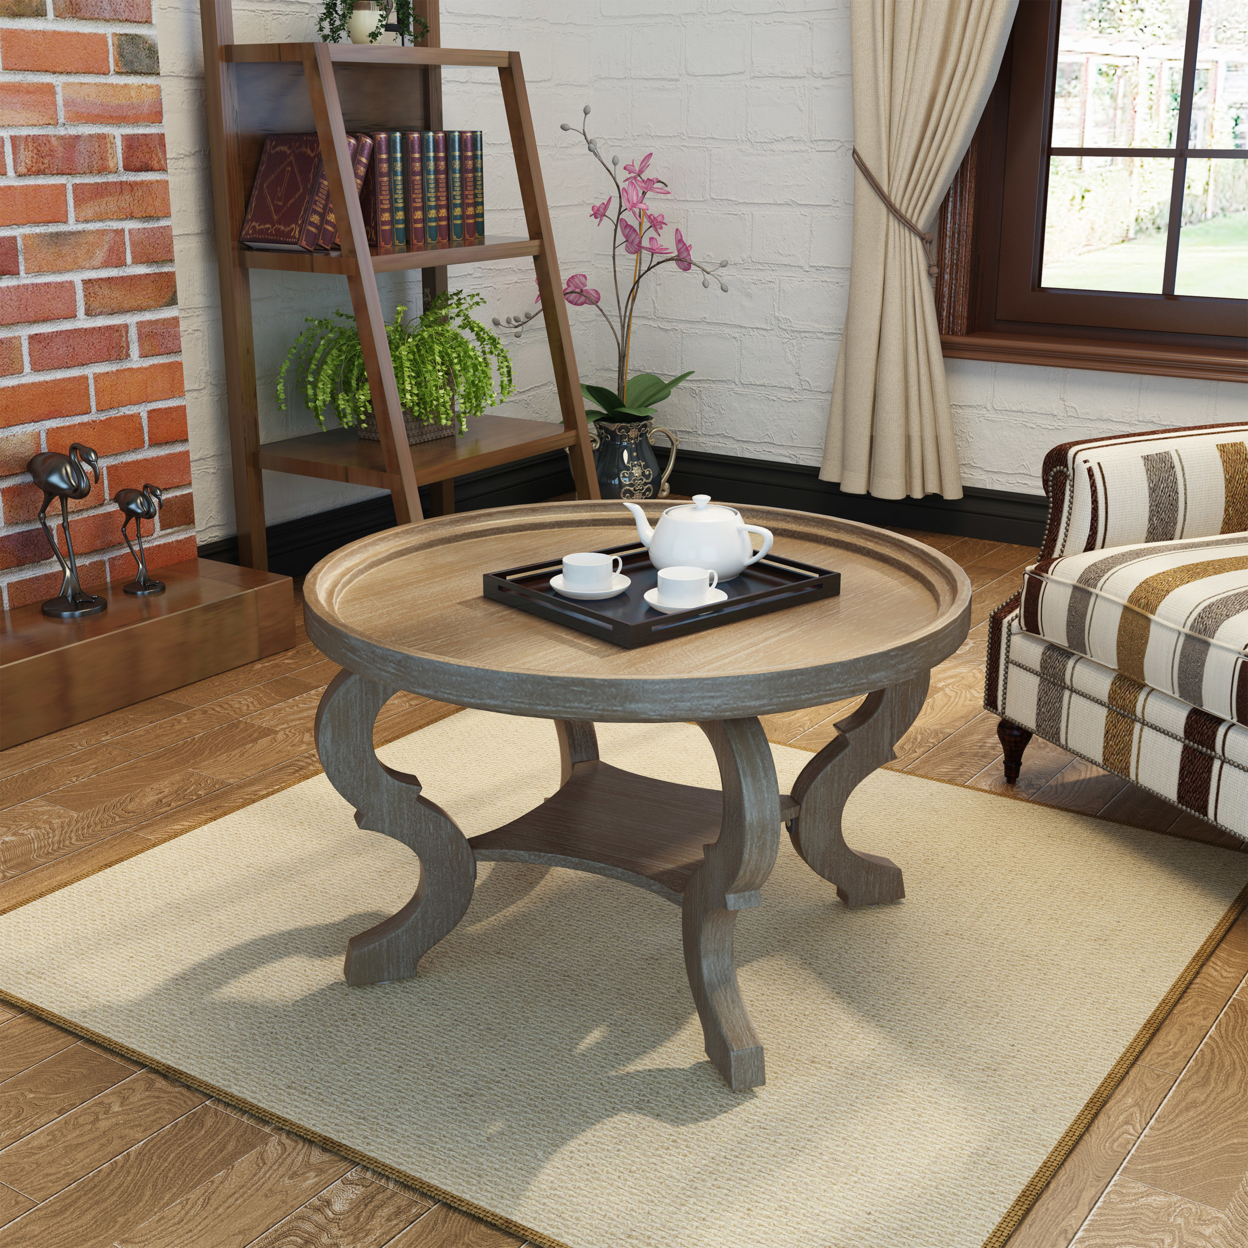 Alteri Finished Faux Wood Circular Coffee Table - Natural